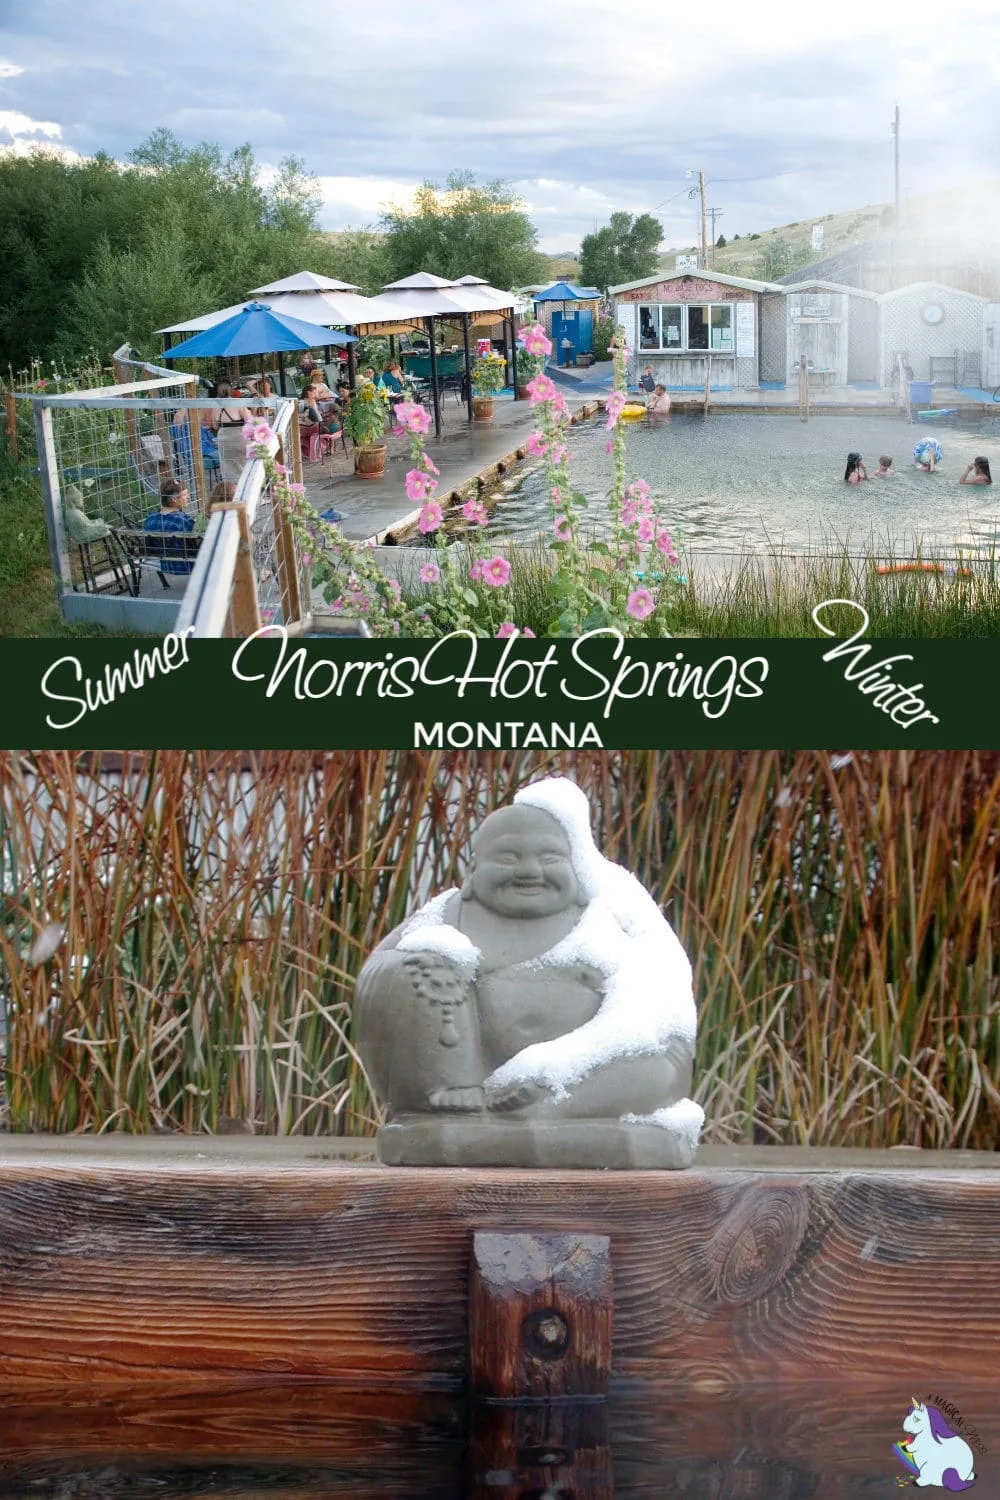 Norris Hot Springs in Montana and a Budda statue. 